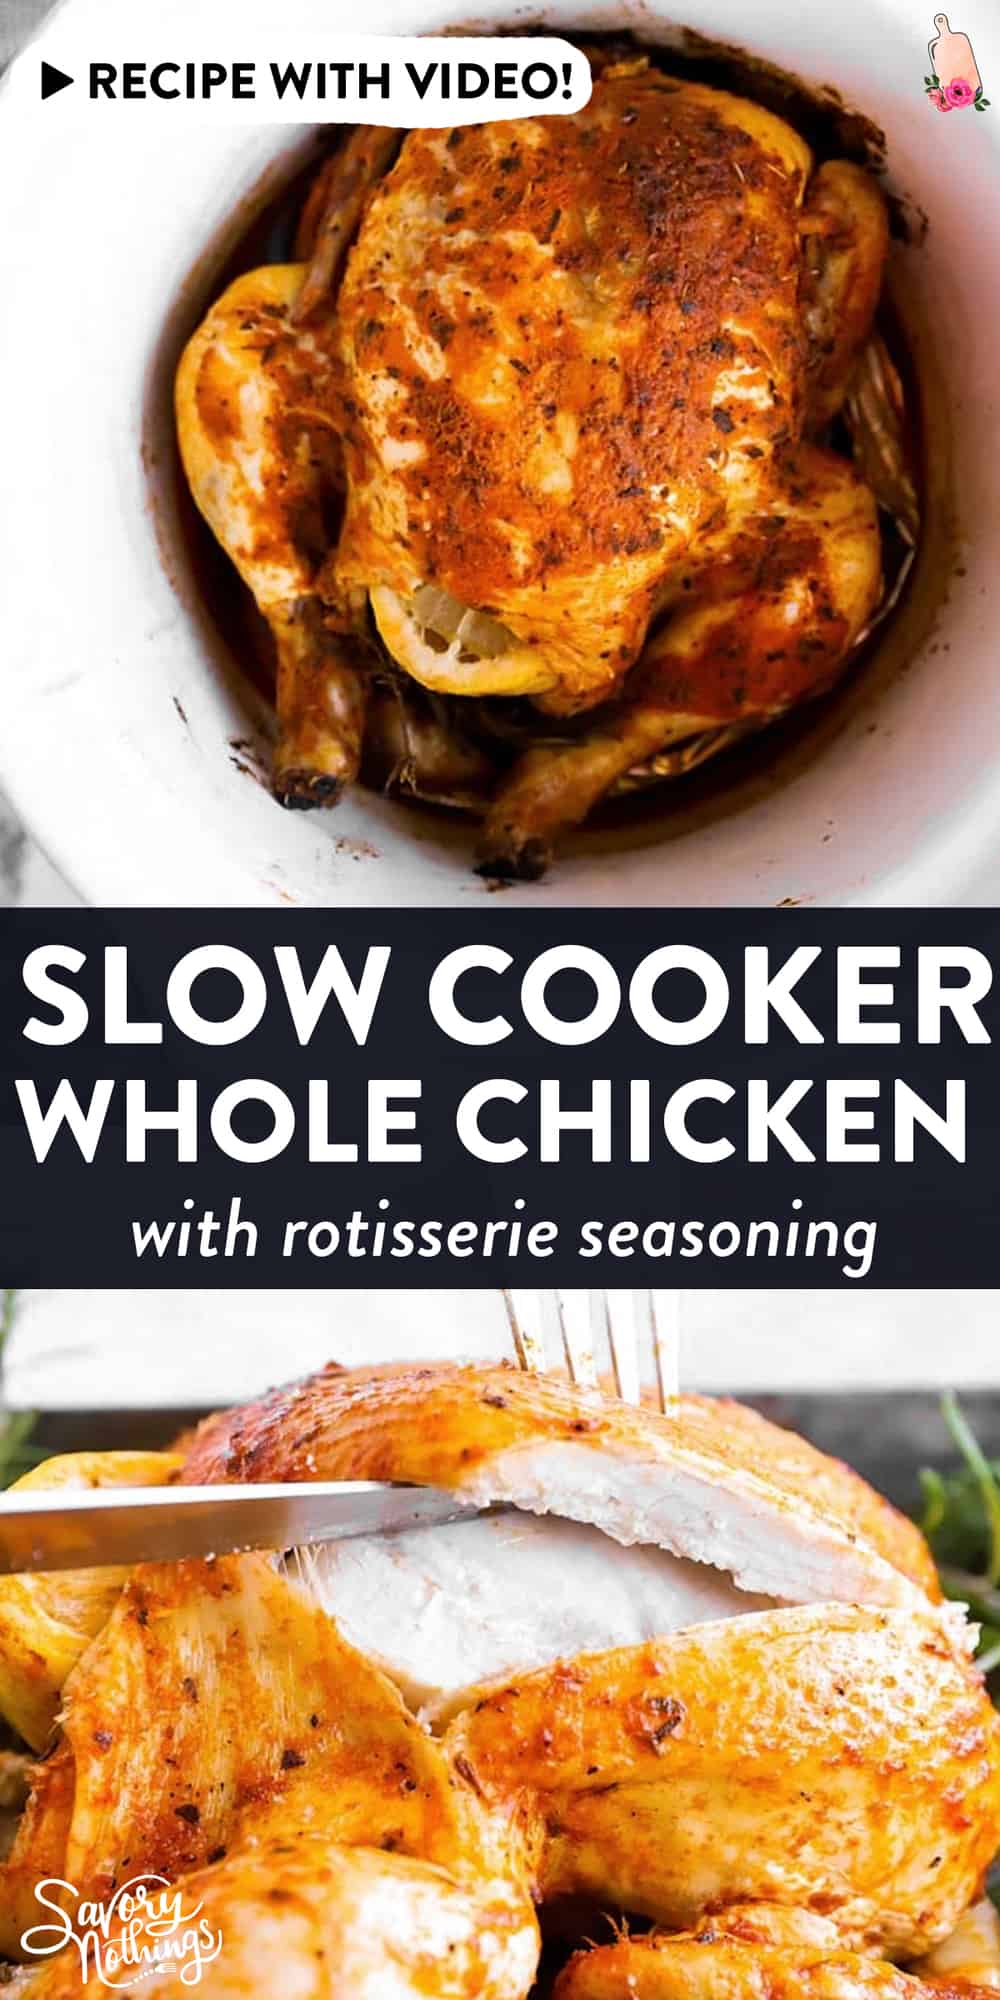 Crockpot Whole Chicken | Savory Nothings